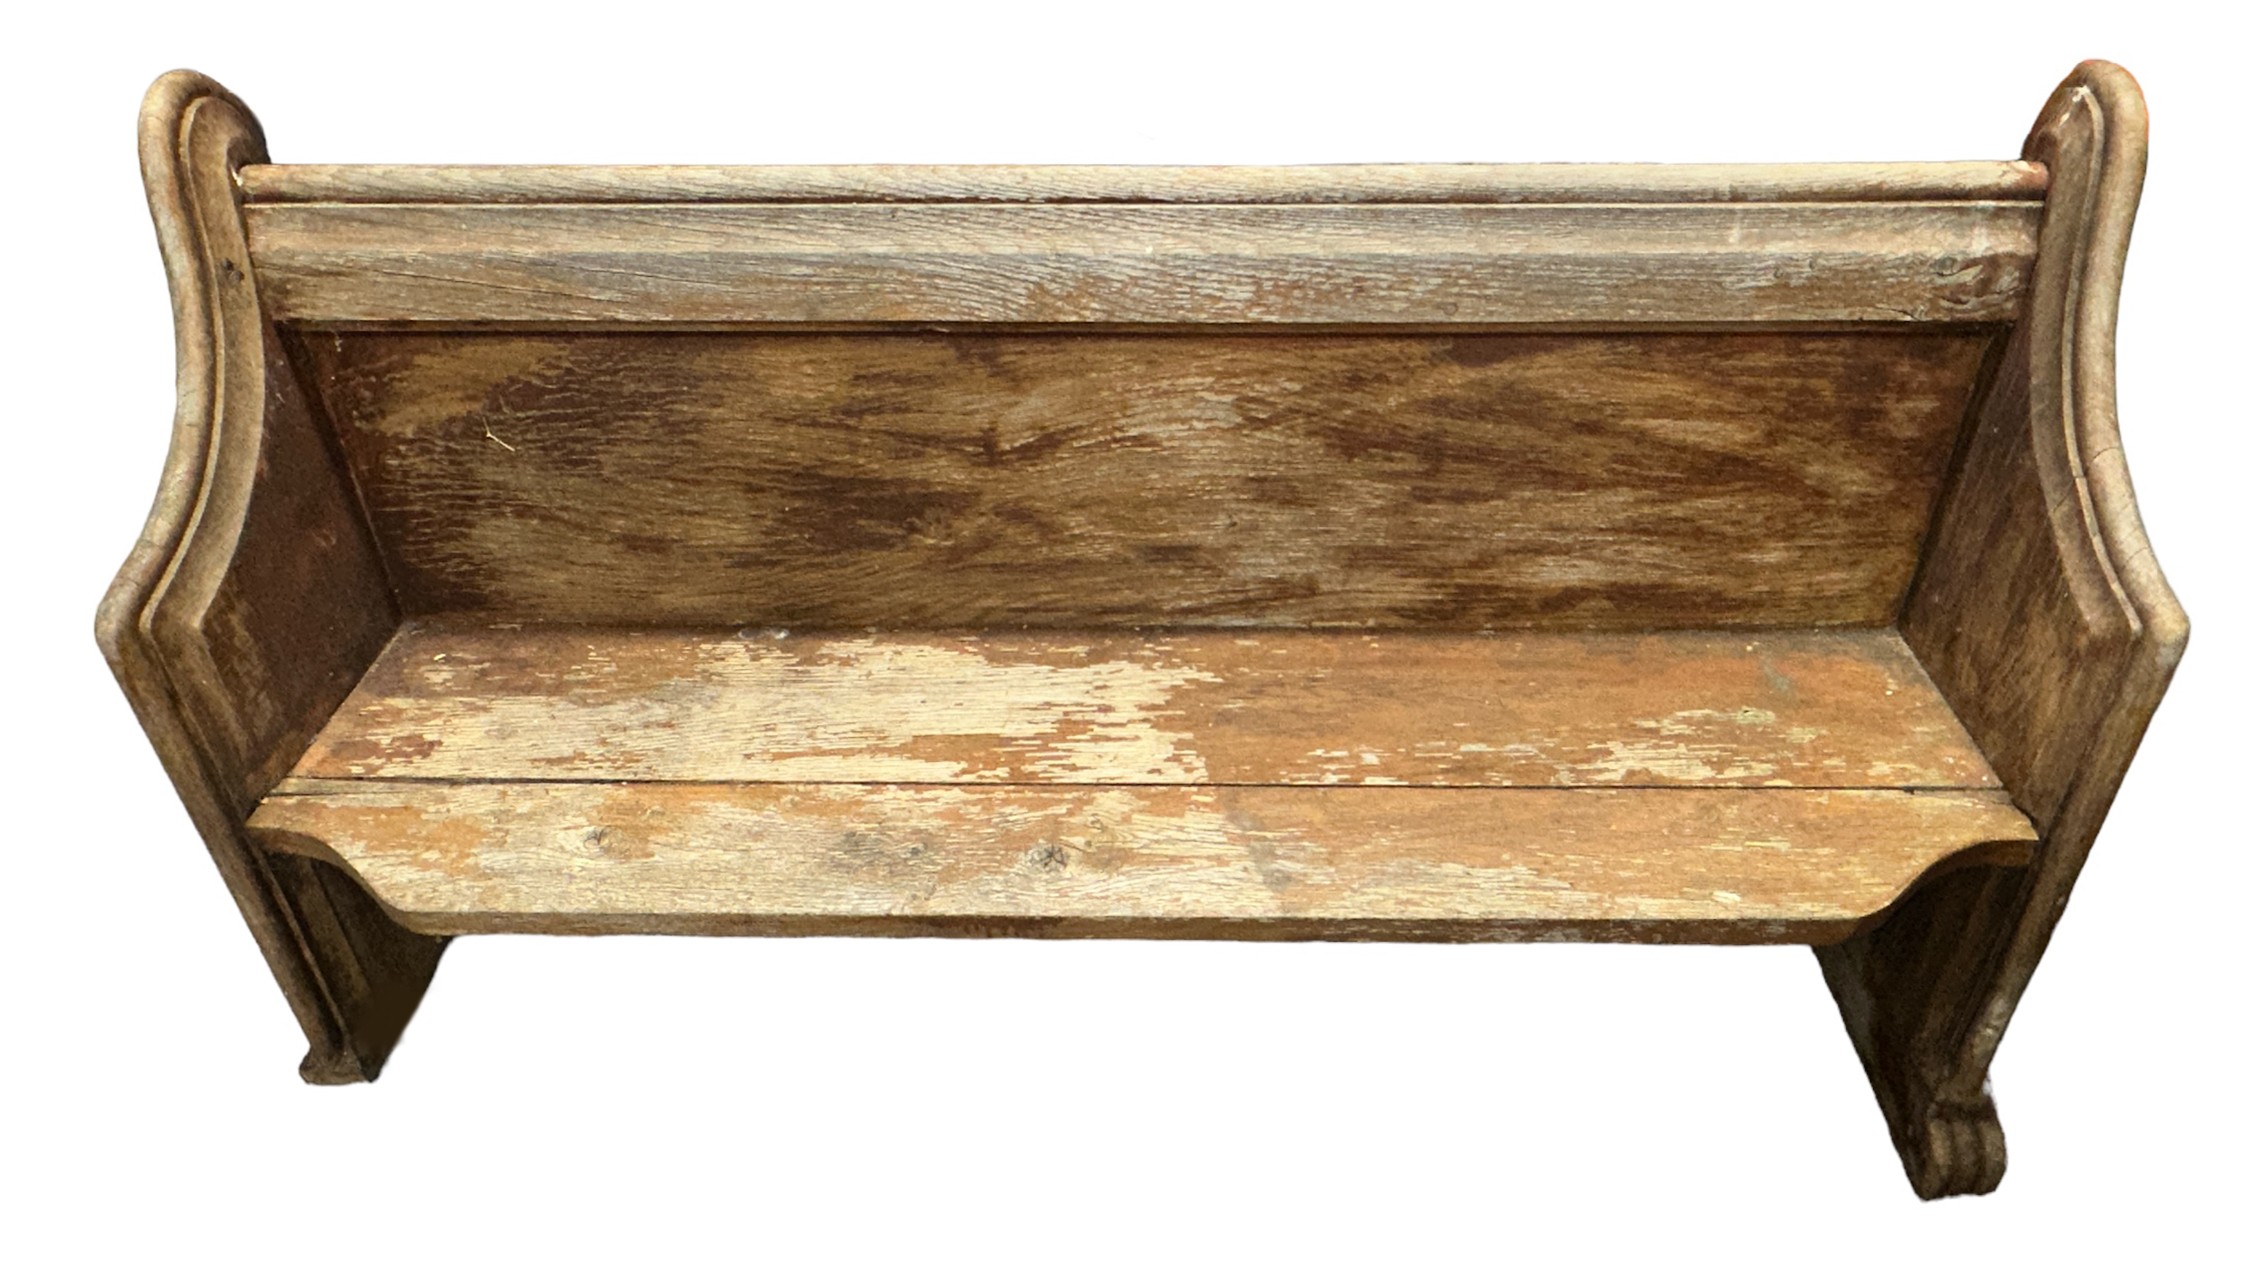 A church oak pew, width 144cm, depth 46cm, height 88cm, weathered from being outdoors, some